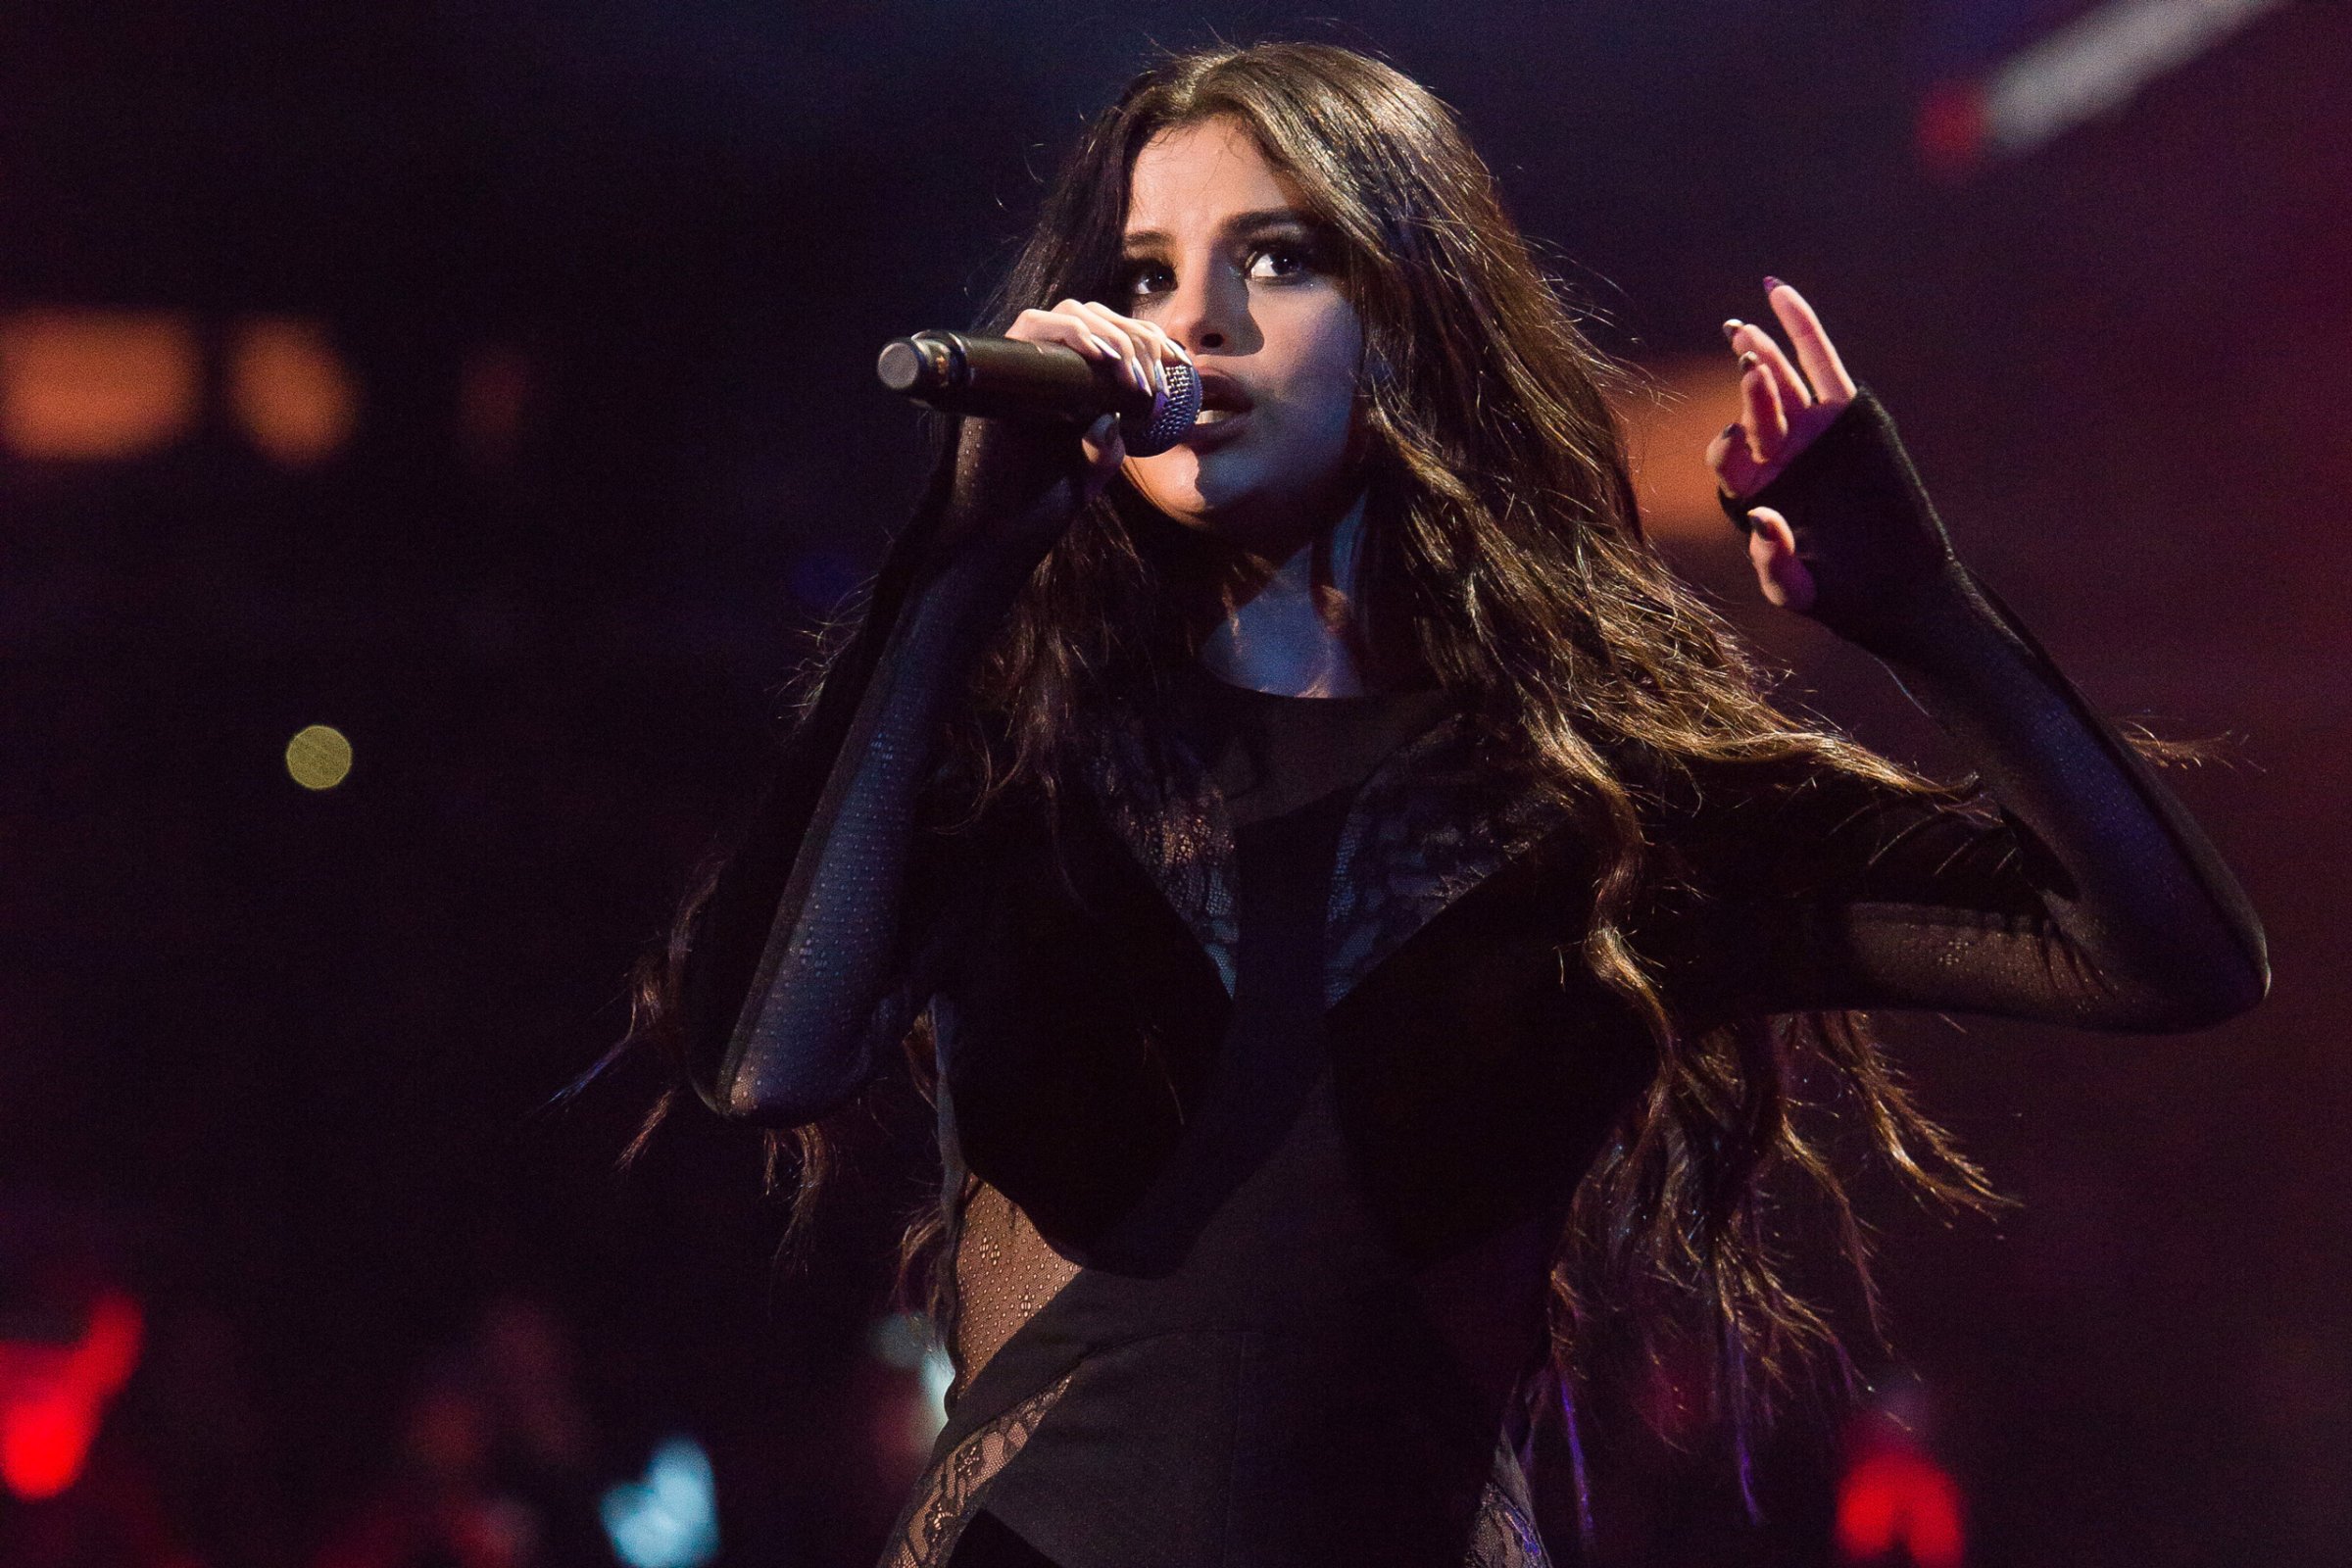 Selena Gomez performs at Z100's iHeartRadio Jingle Ball 2015, presented by Capital One, at Madison Square Garden on Friday, Dec. 11, 2015, in New York. (Photo by Charles Sykes/Invision/AP)